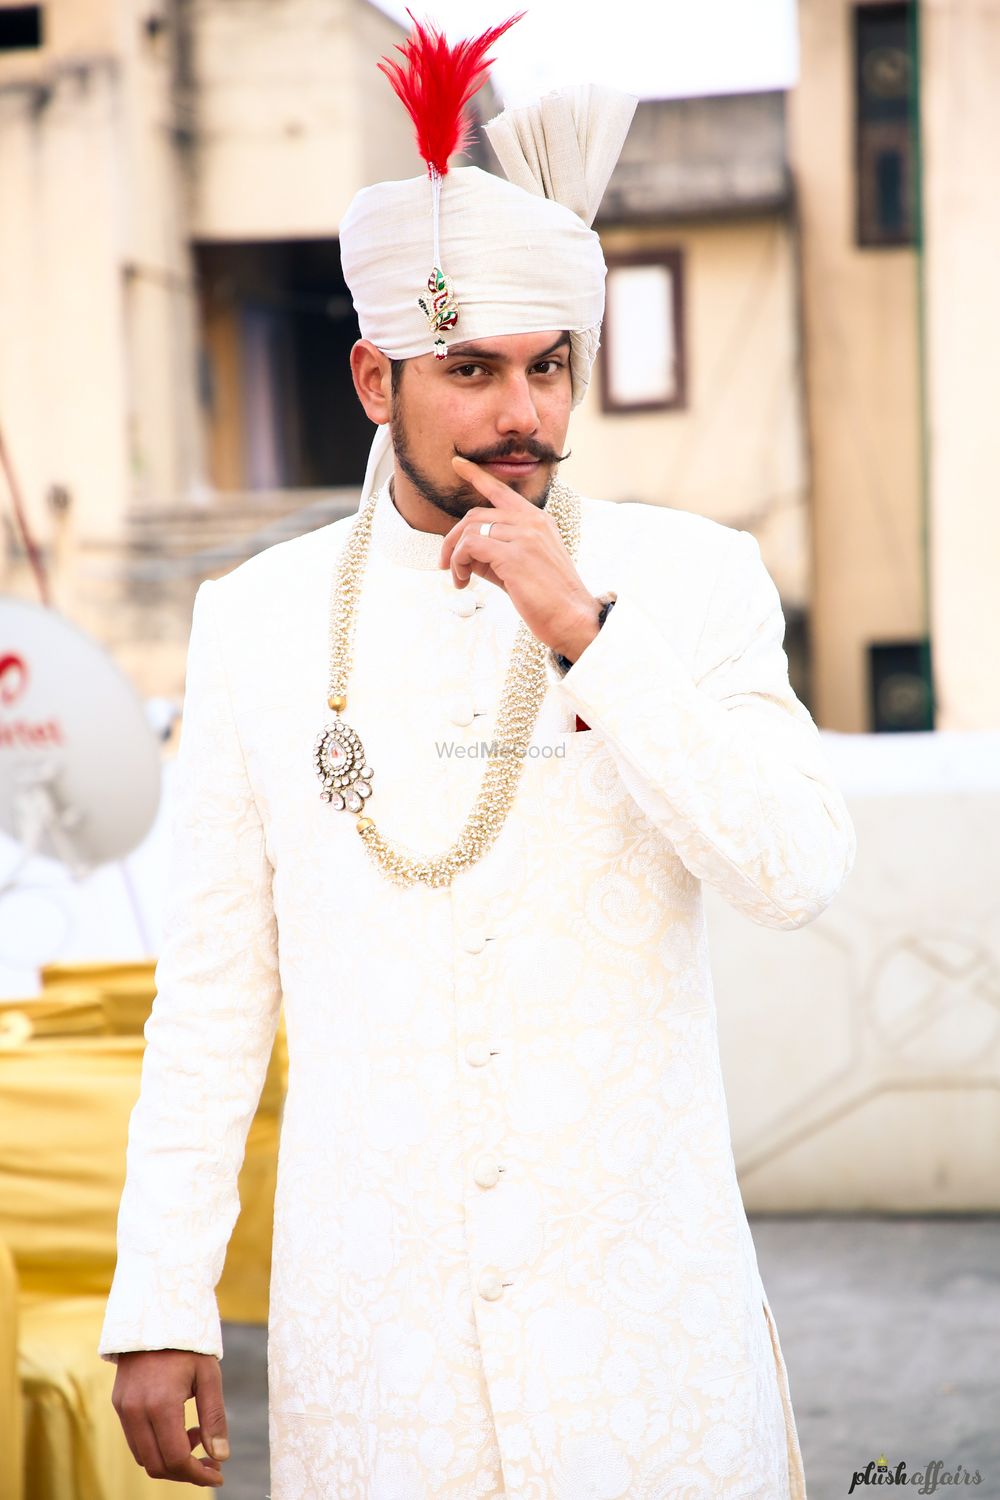 Photo of Groom wearing white sherwani jewellery and turban with red feather